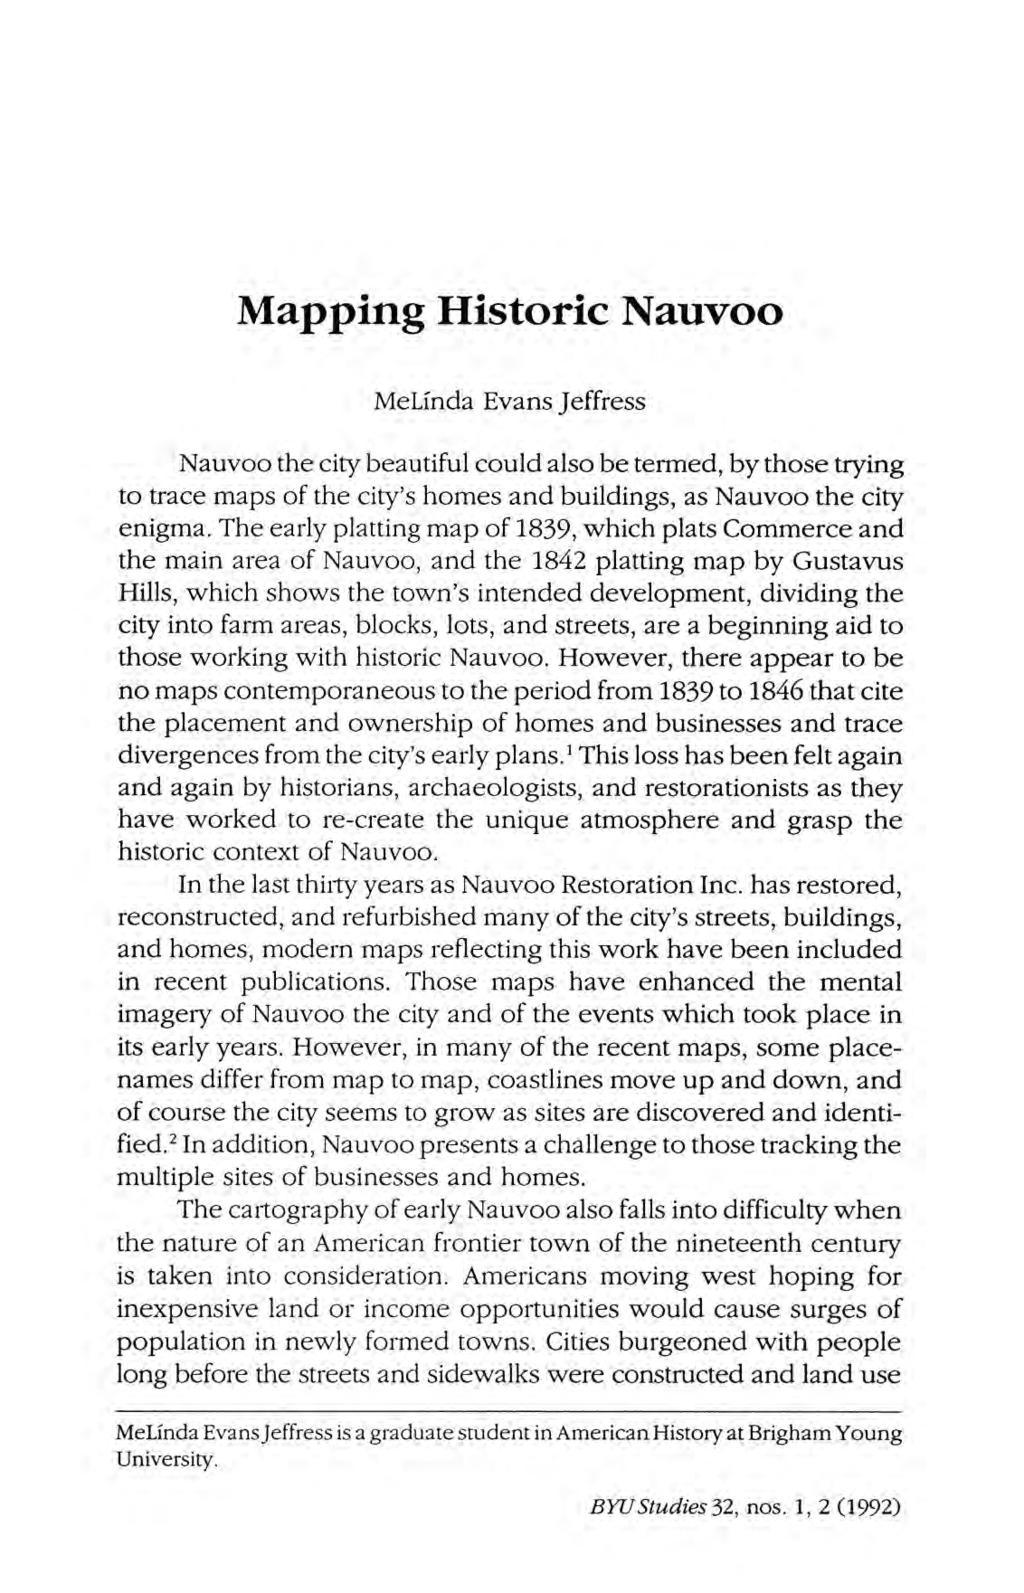 Jeffress: Mapping Historic Nauvoo mapping historic nauvoo melinda evans jeffress nauvoo the city beautiful could also be termed by those trying to trace maps of the citys cites homes and buildings as